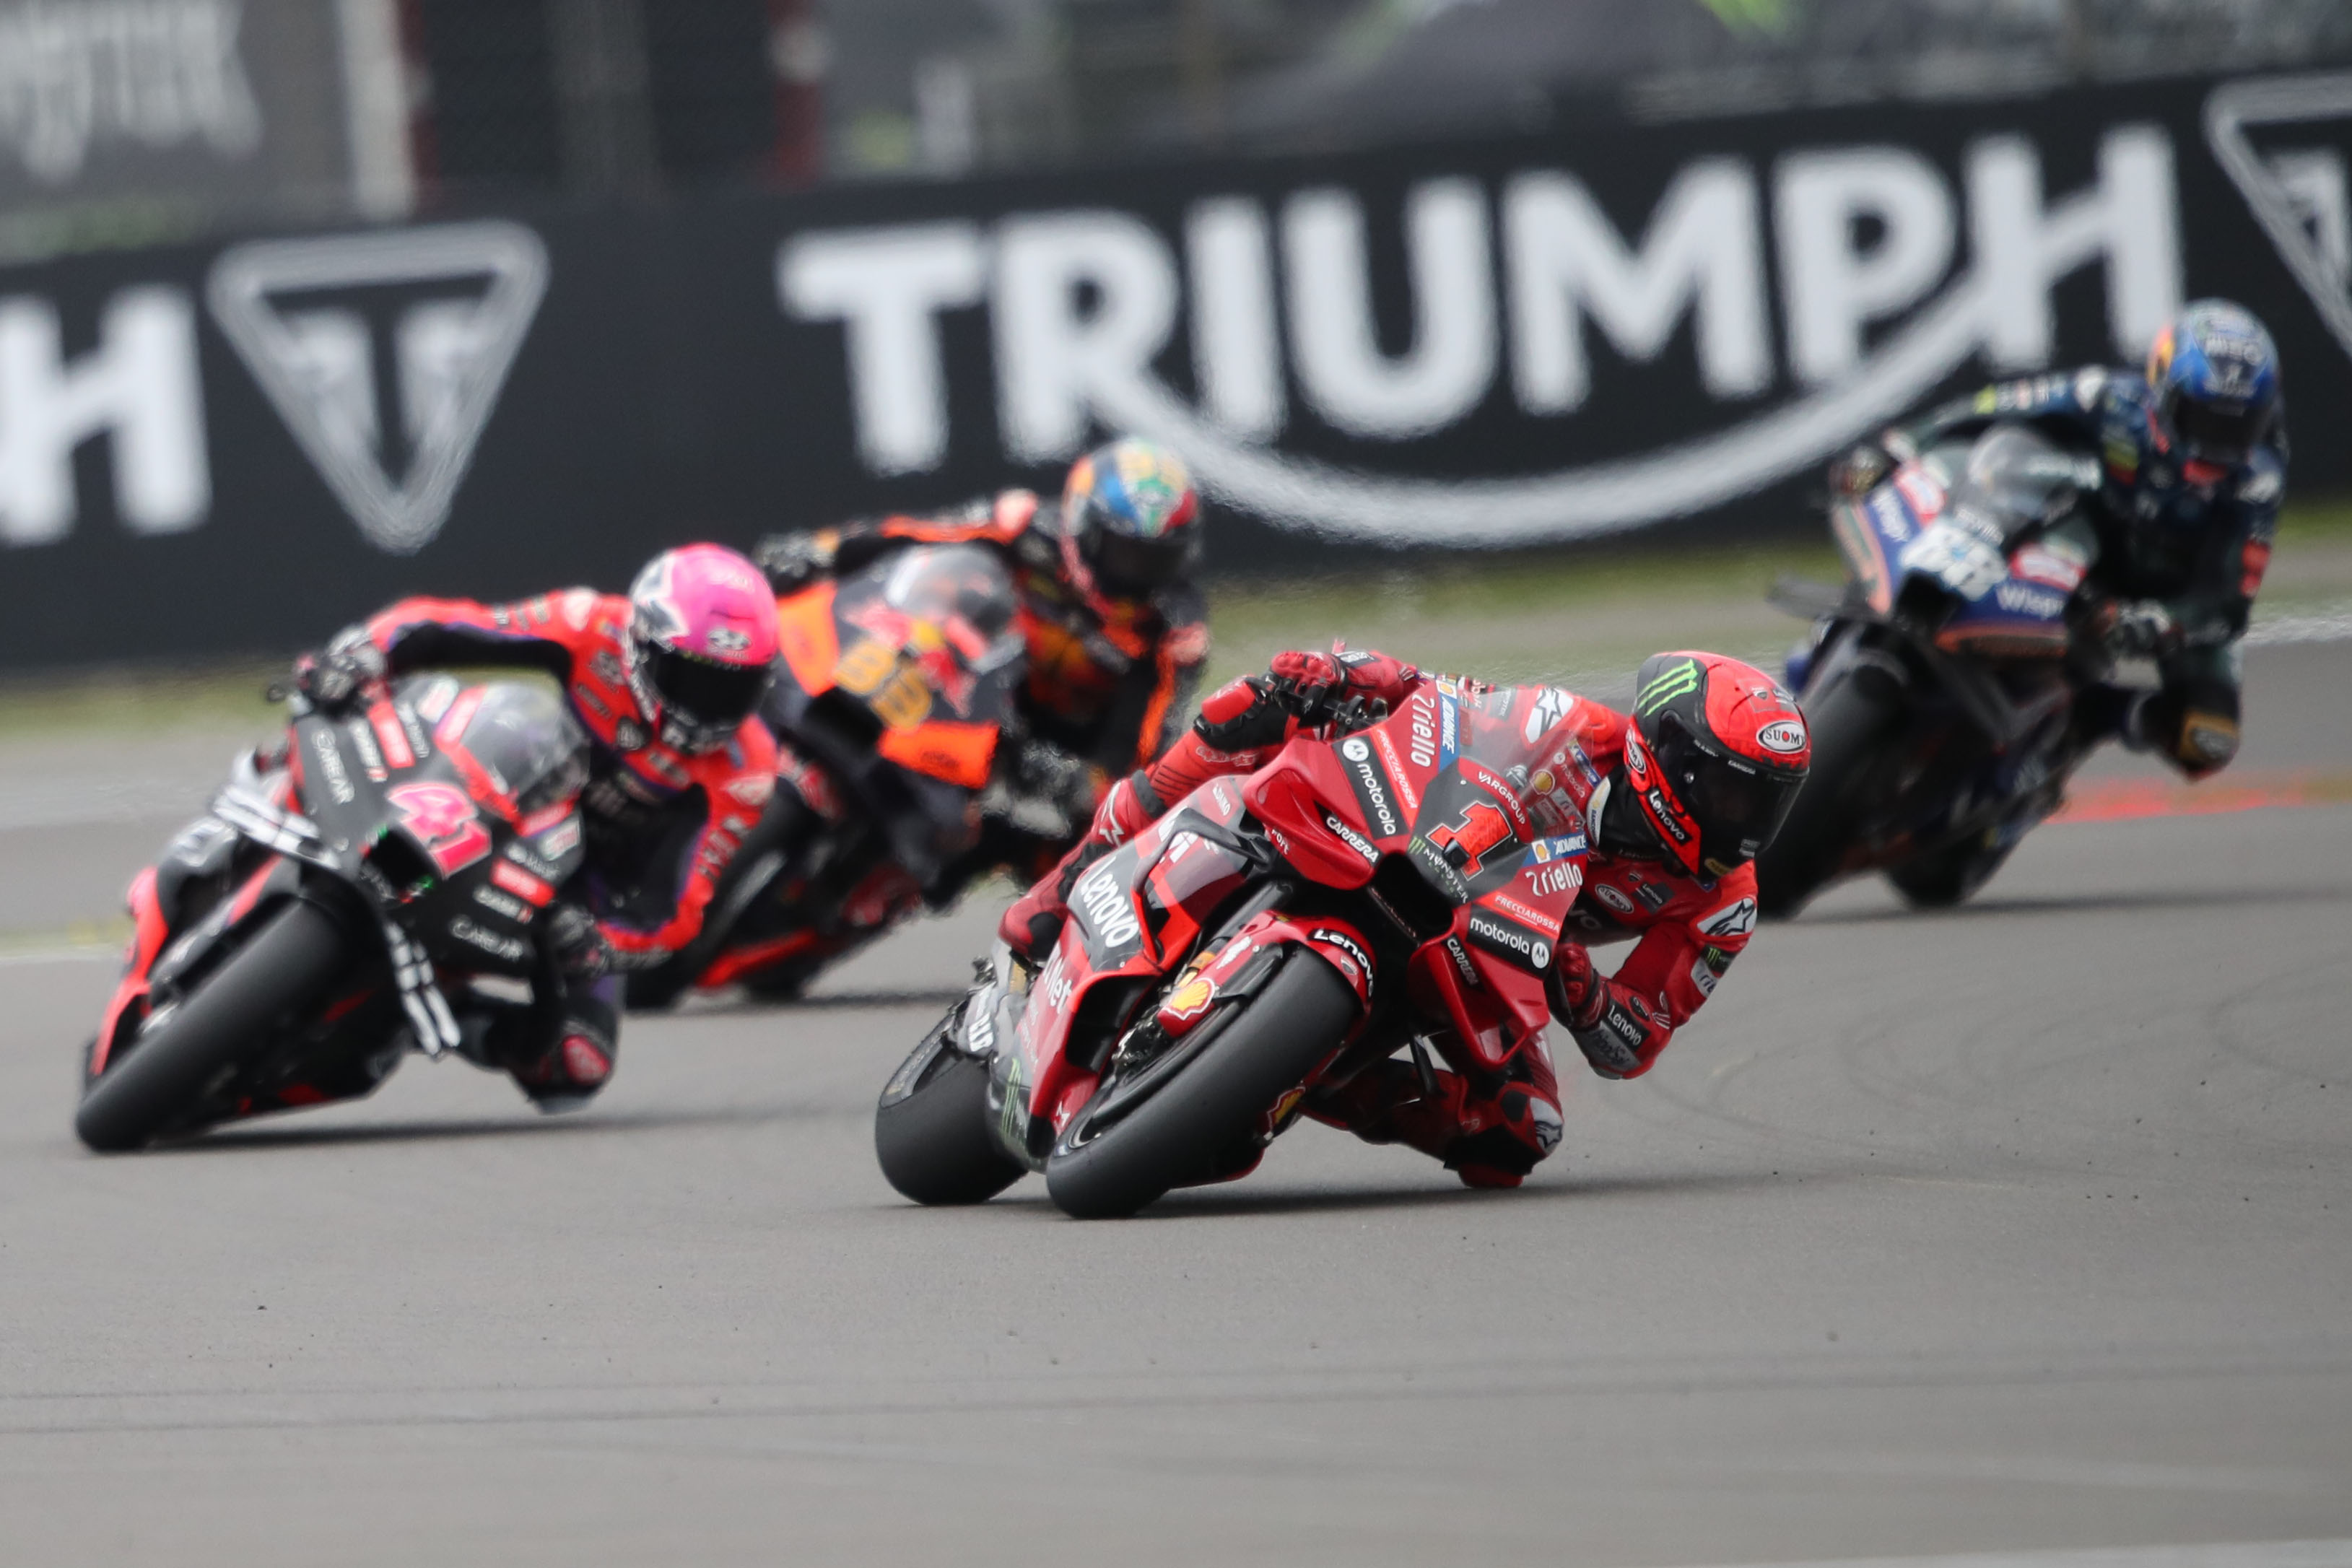 How can Silverstone solve its MotoGP problems? Our verdicts